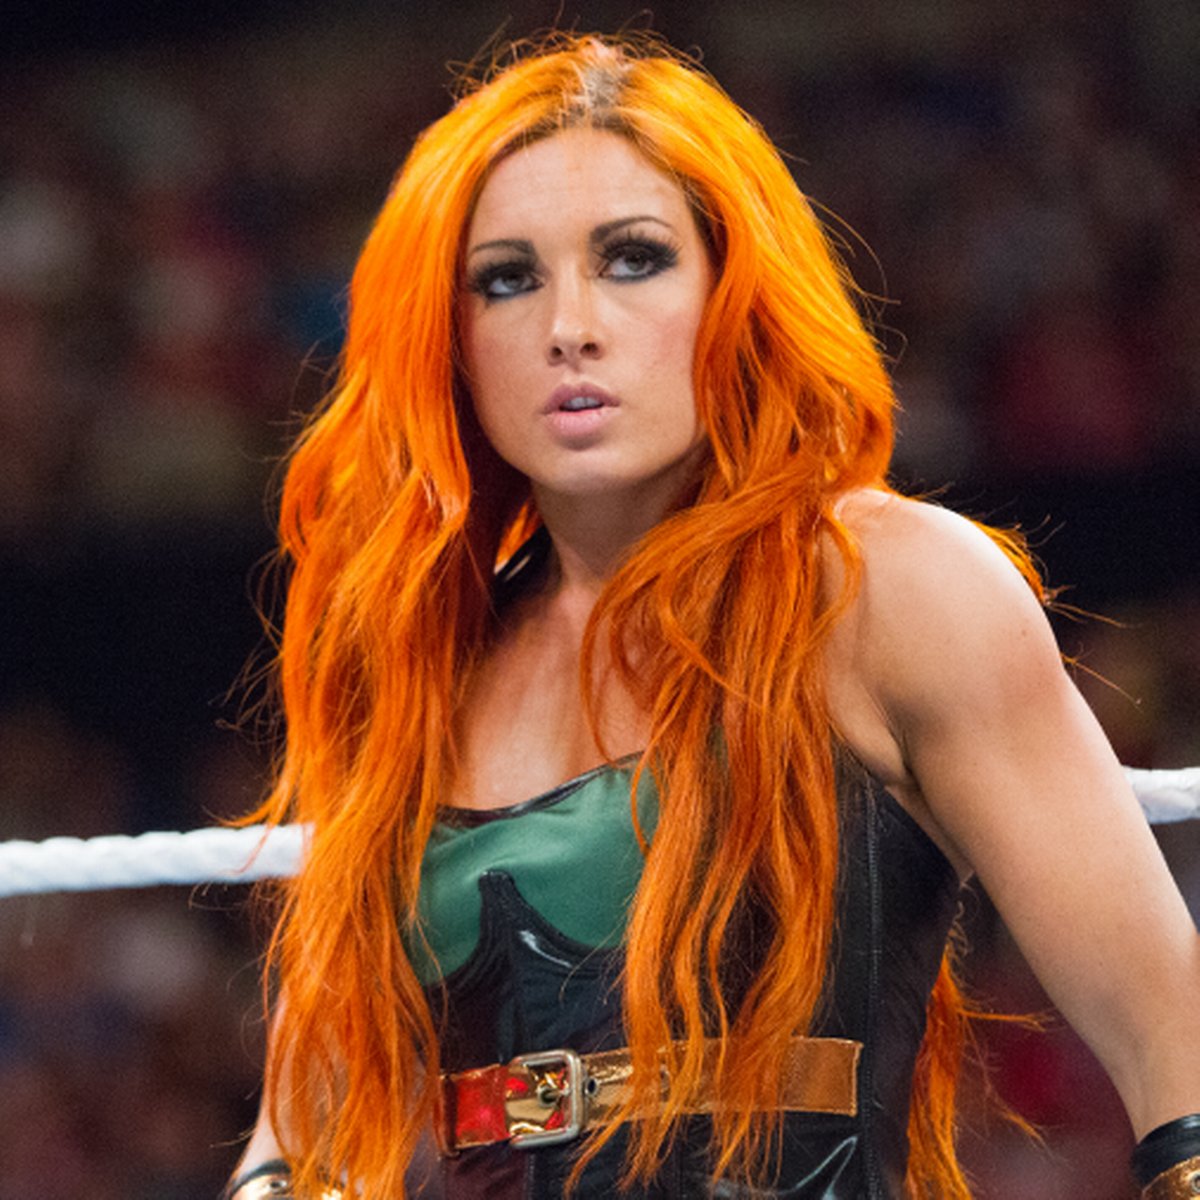 Day 92 of missing Becky Lynch from our screens!